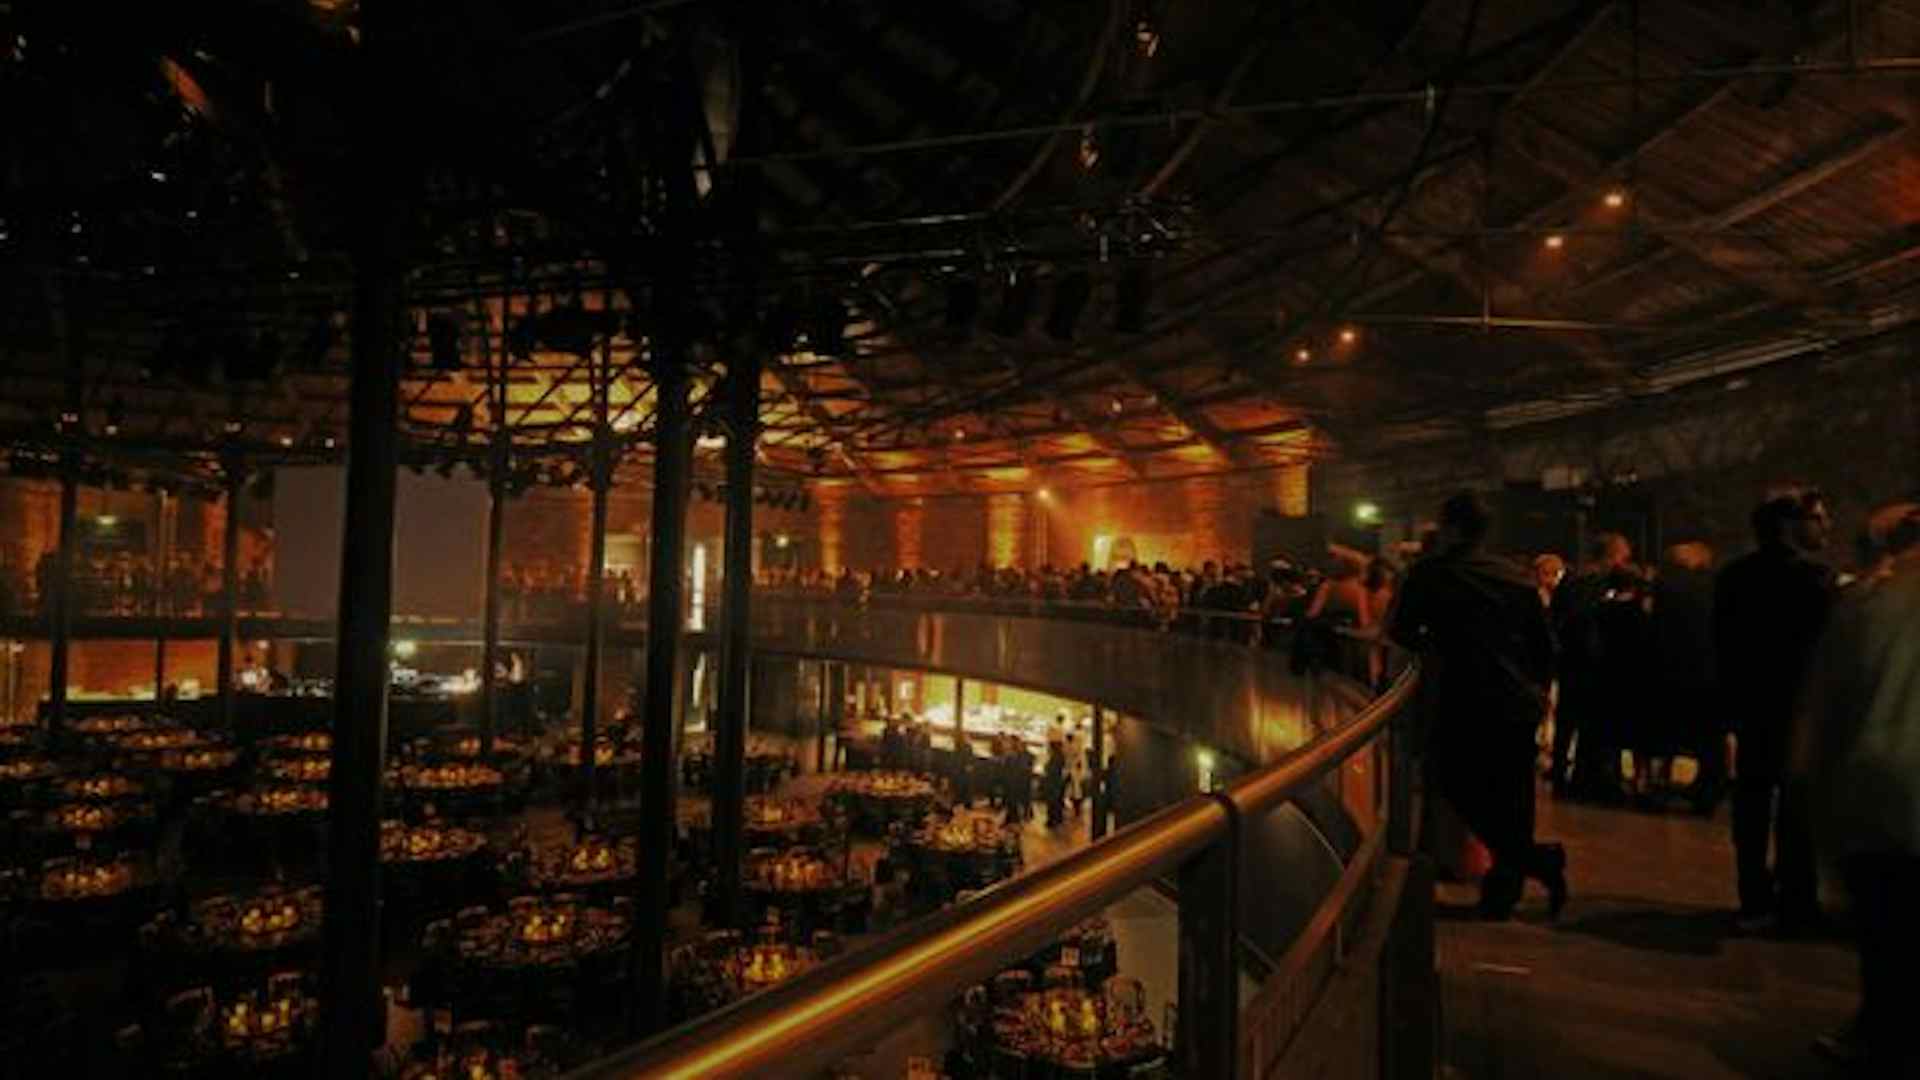 Make Your Vision a Reality With Our Unique Venue of the Month: Roundhouse